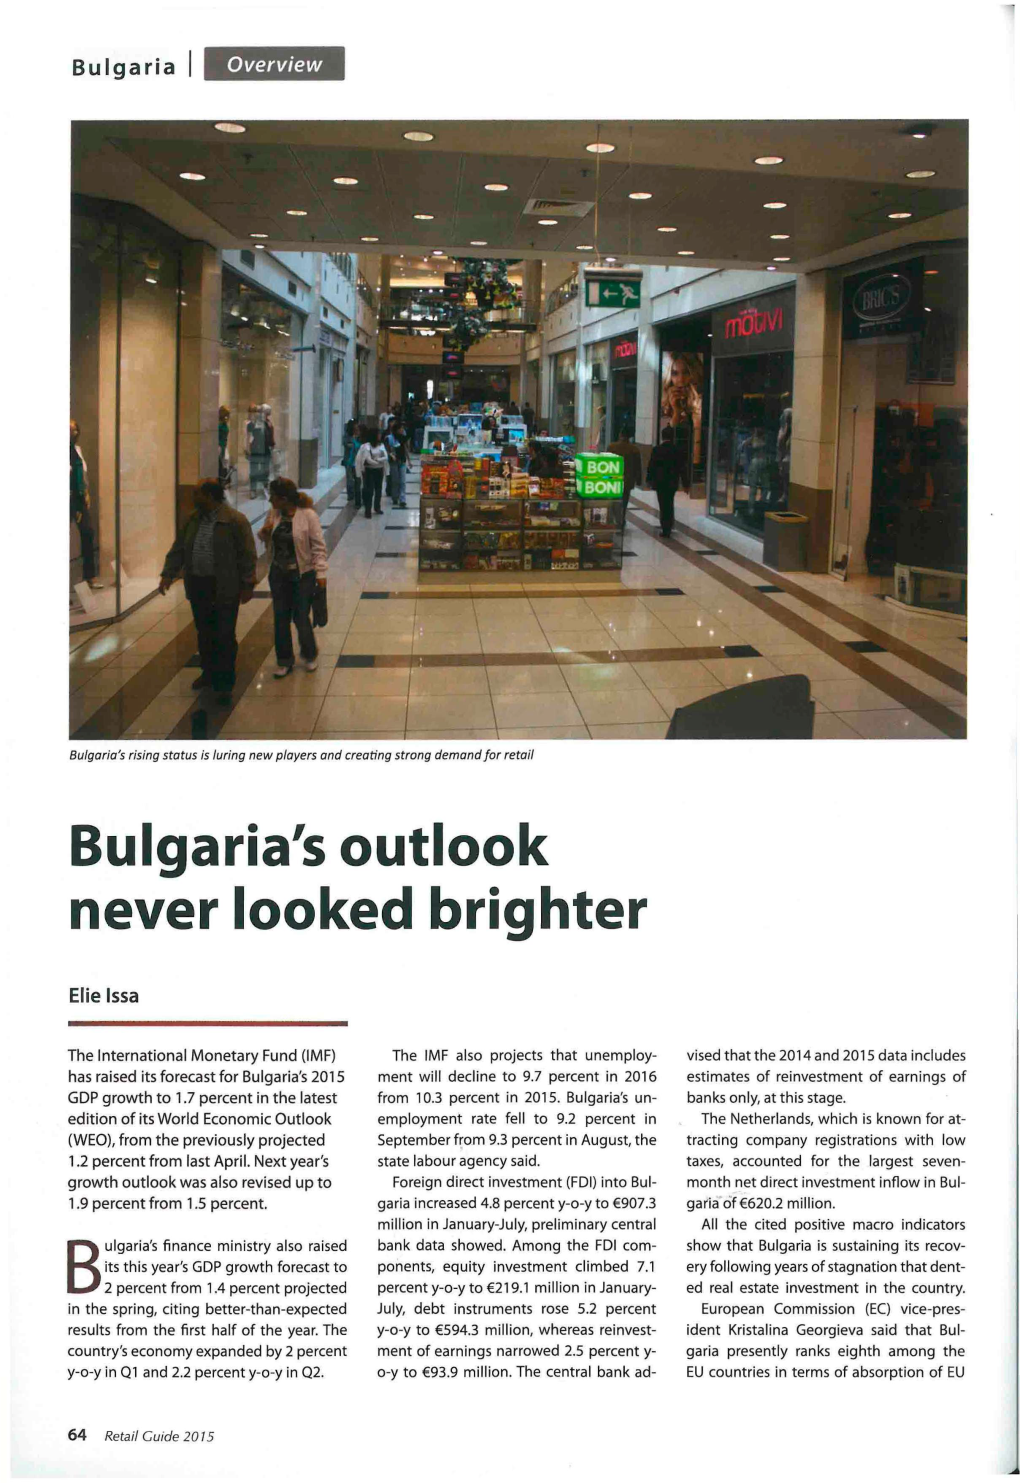 Bulgaria's Outlook Never Looked Brighter